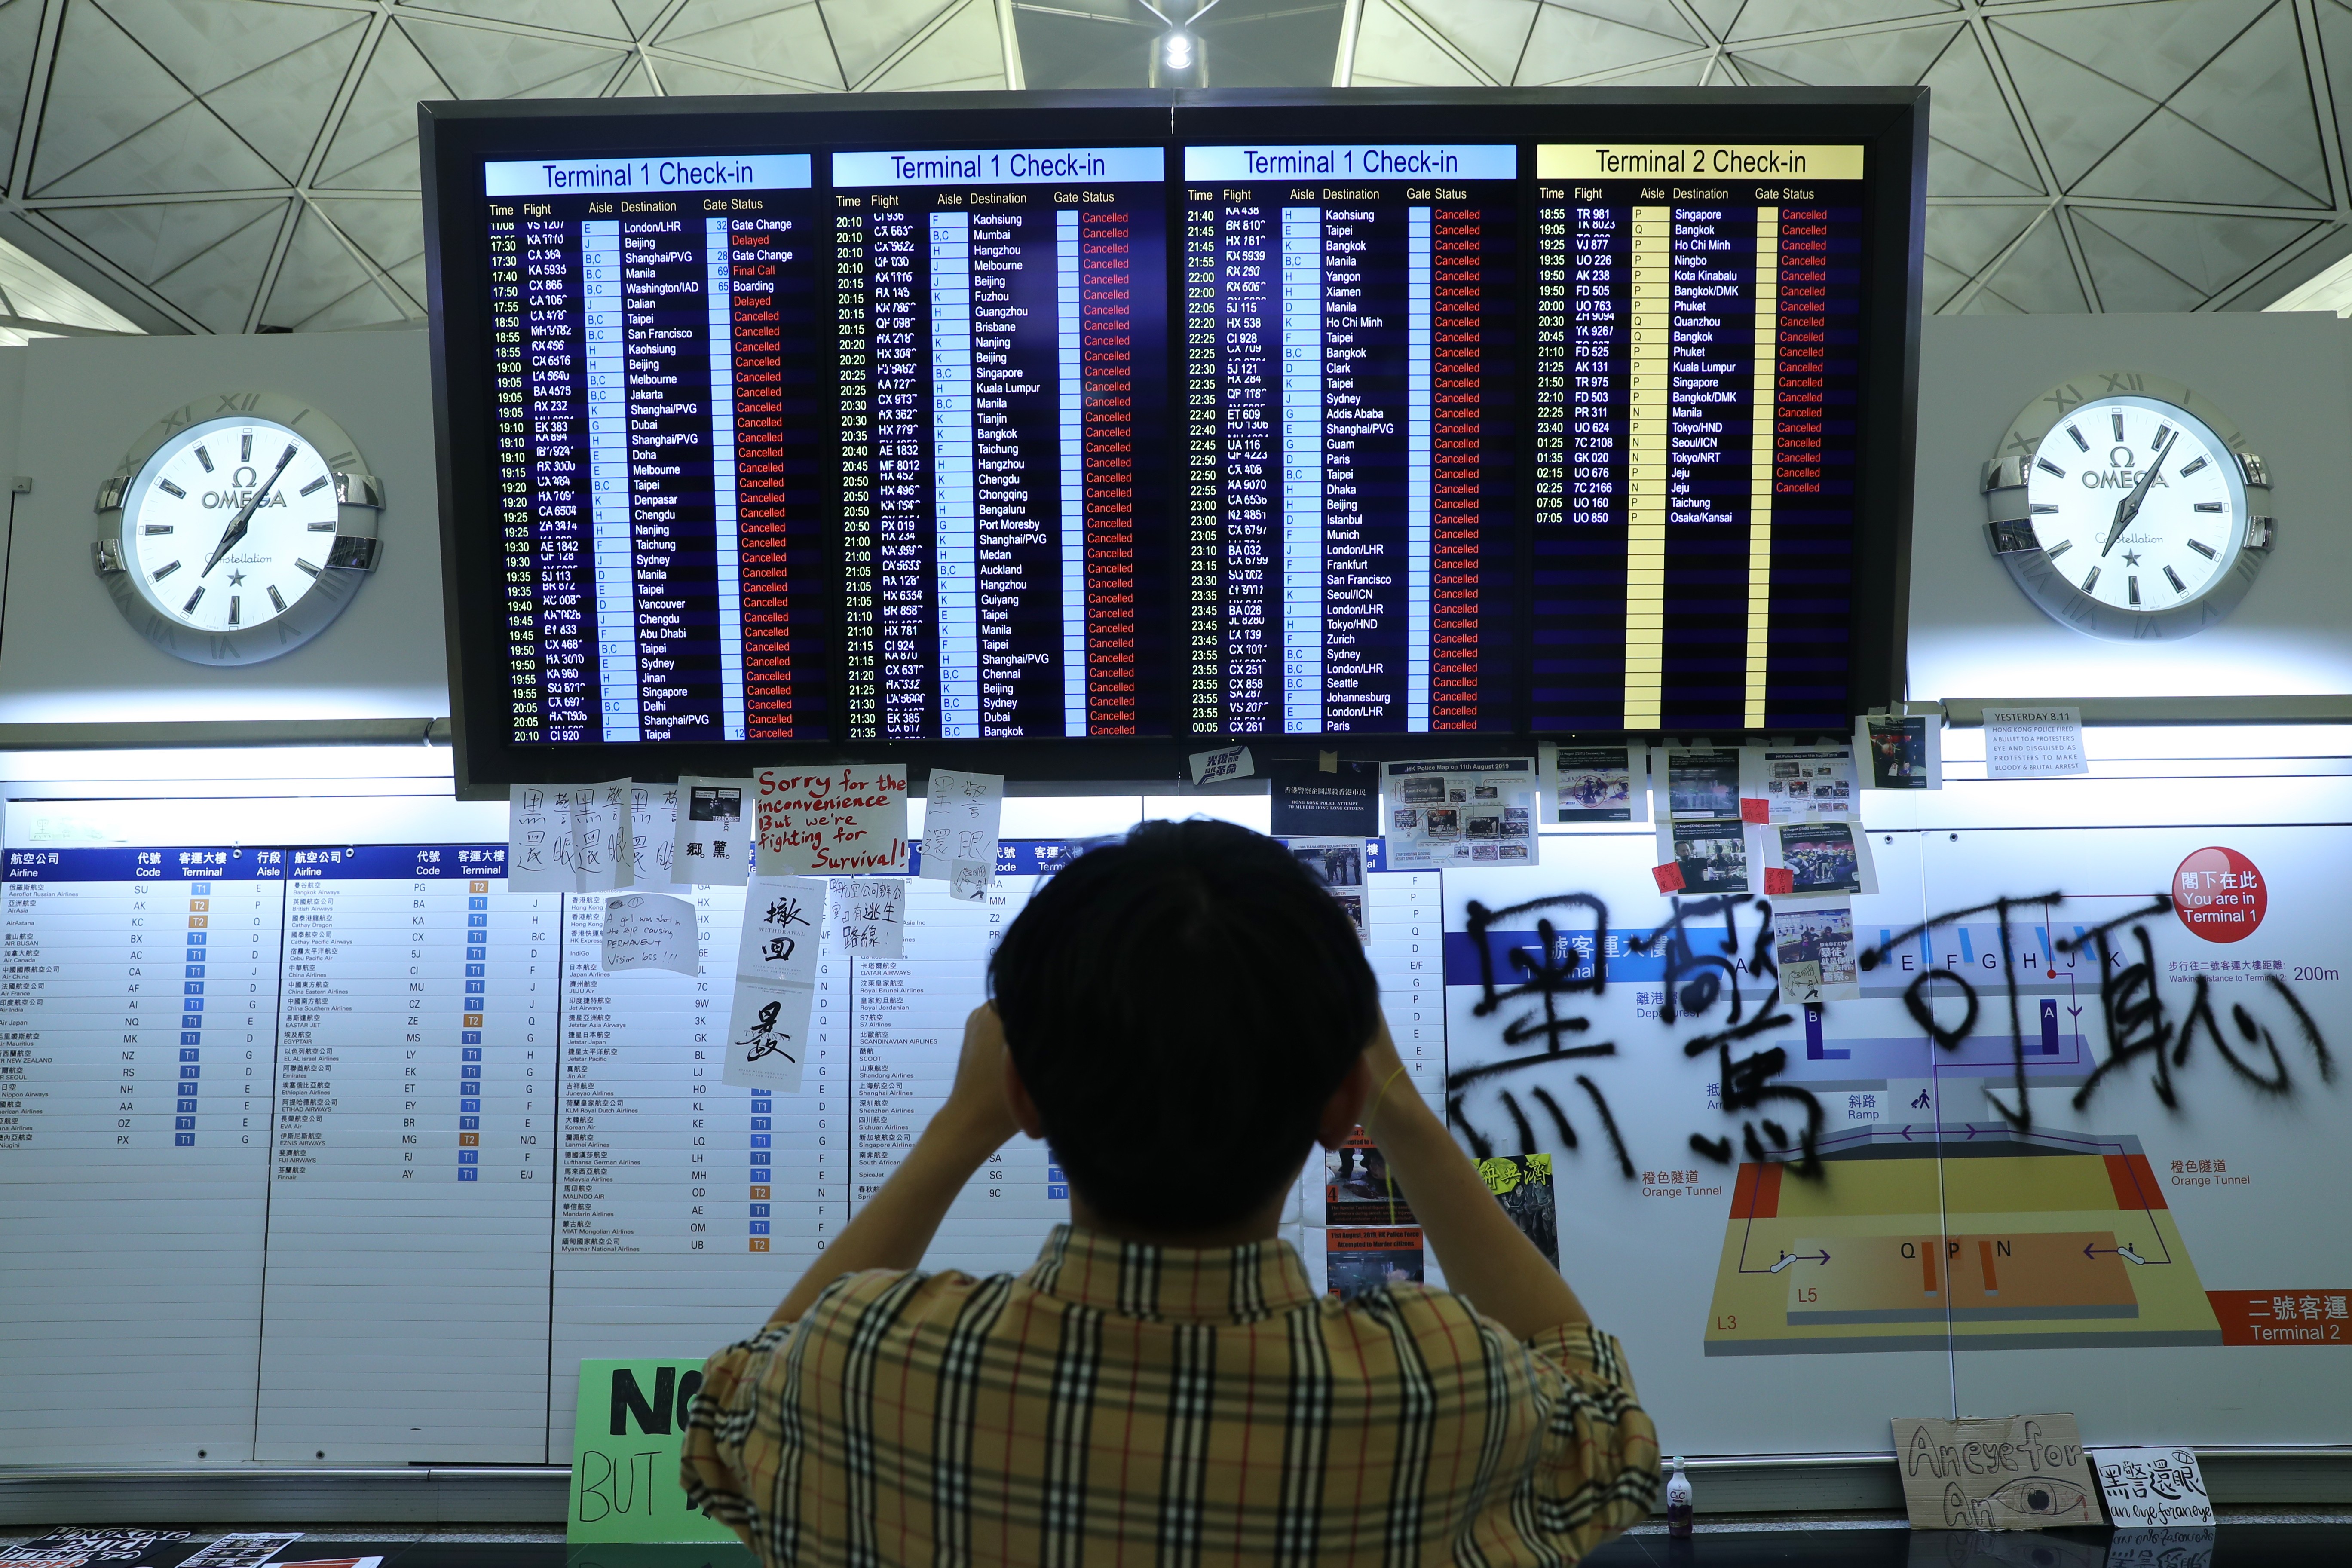 A tourist in front of the electronic board showing cancelled flights at the Hong Kong International Airport at Chek Lap Kok on August 12, 2019, as anti-government protesters occupied the airport, forcing authorities to cancel hundreds of outbound and inbound flights. Graffiti by protesters were scribbled in the right-hand corner. Photo: SCMP / Sam Tsang